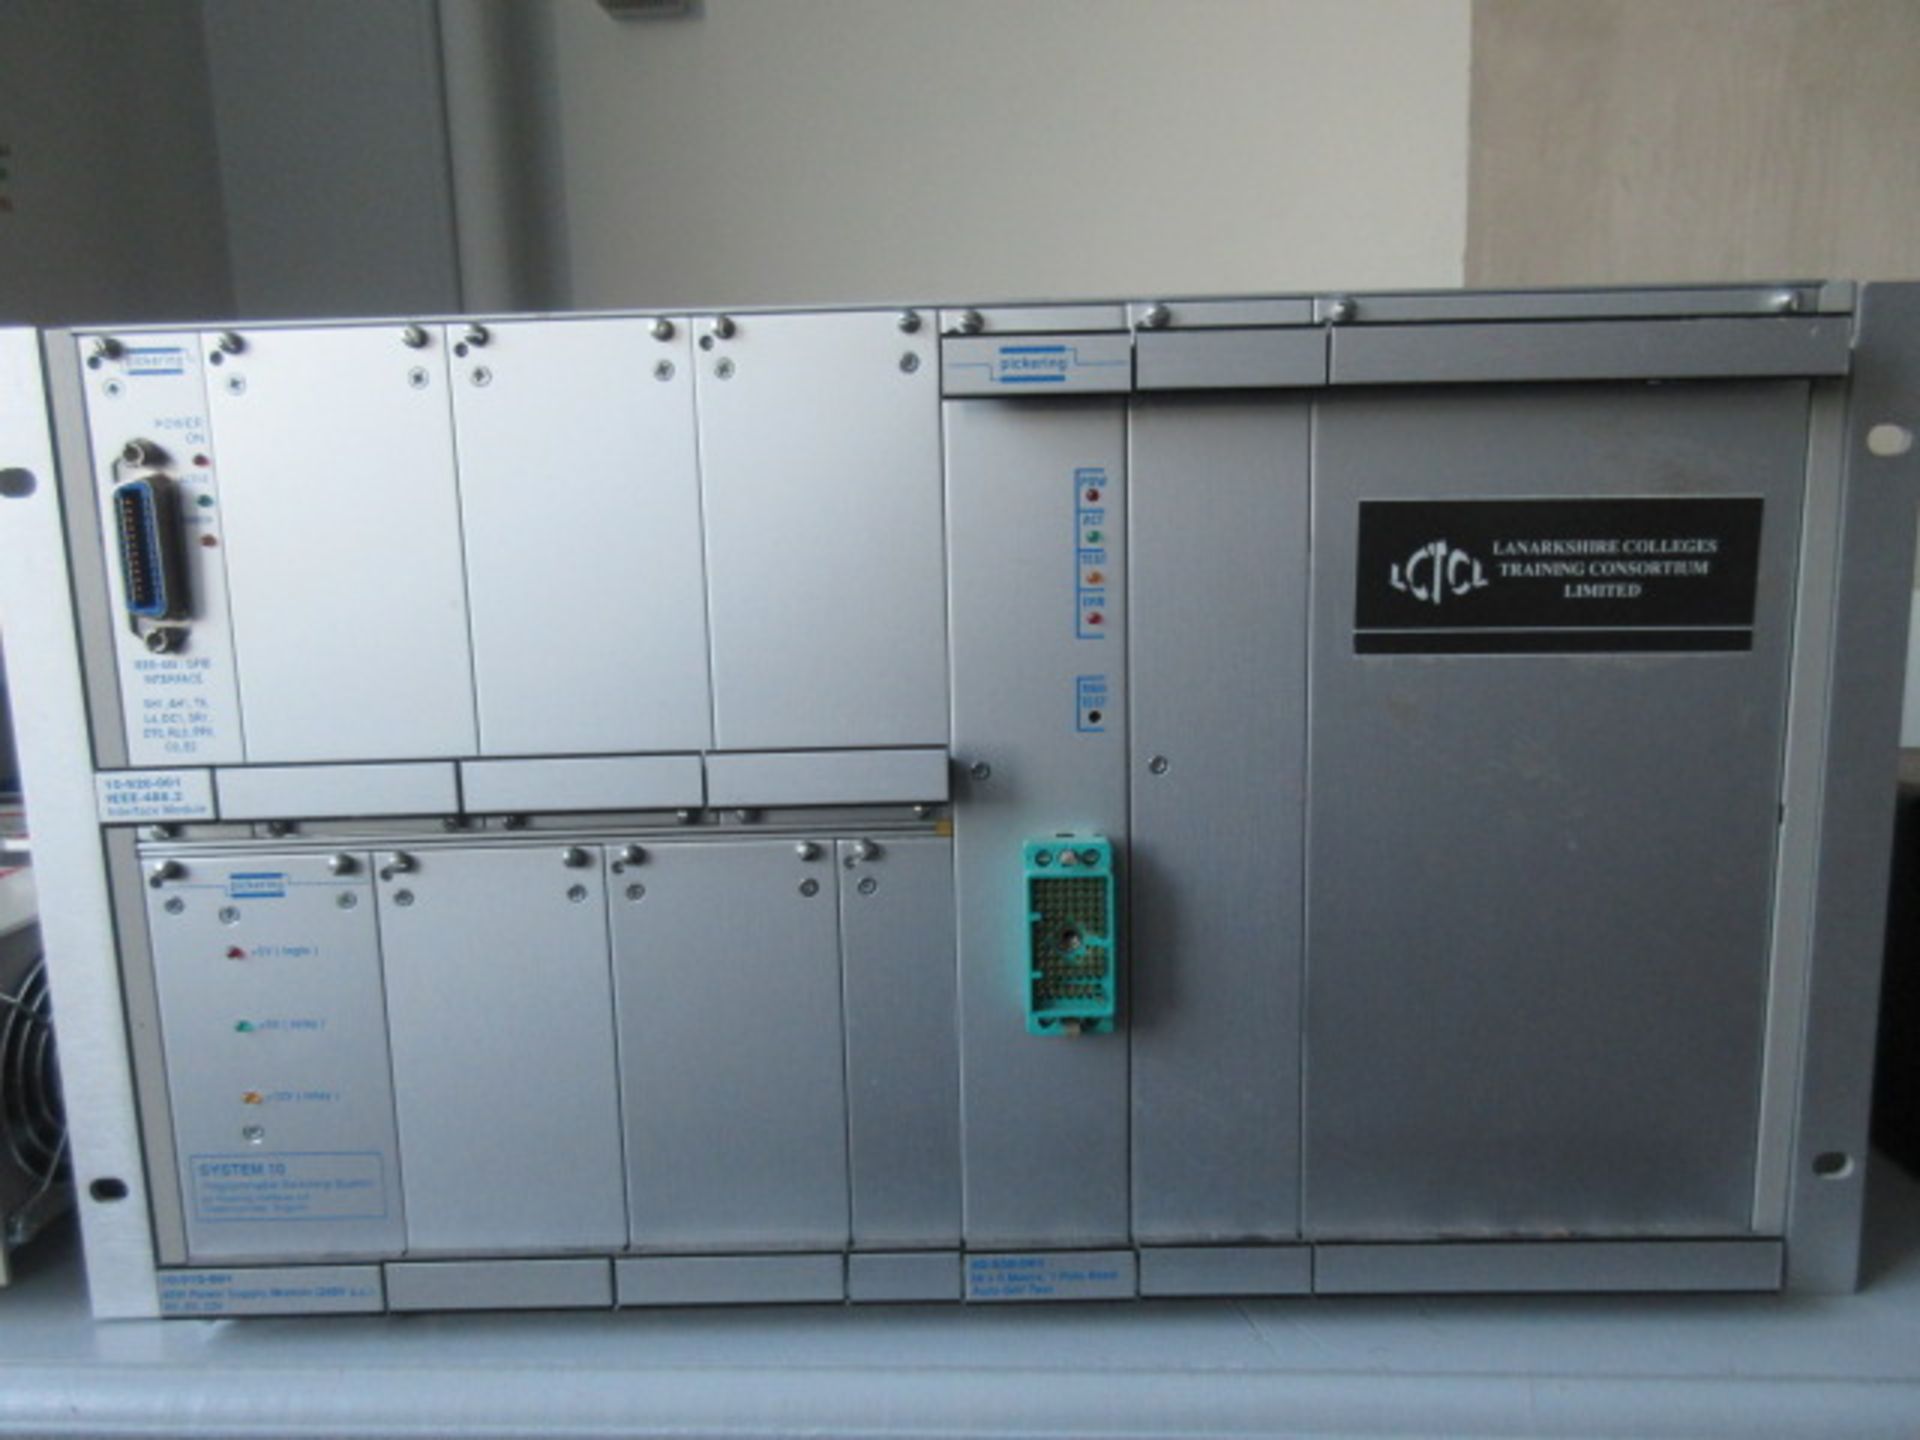 PICKERING SYSTEM 10 PROGRAMMABLE SWITCHING SYSTEM